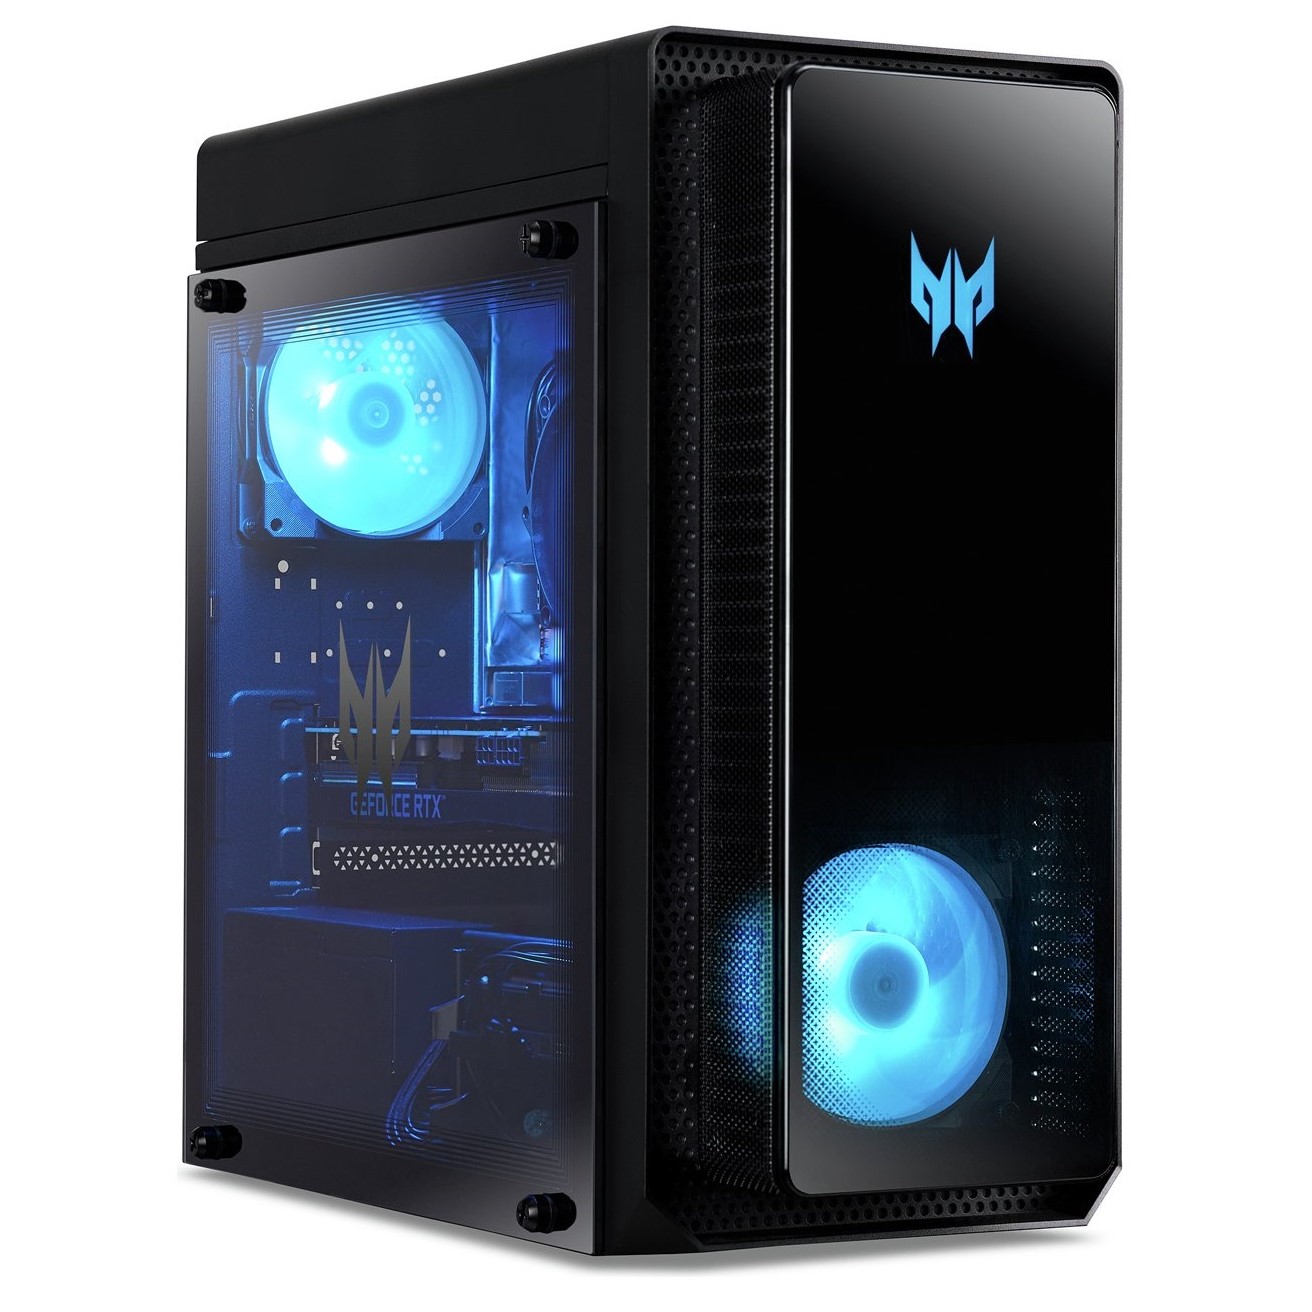 Acer Predator Orion 3000 gaming PC against a white background